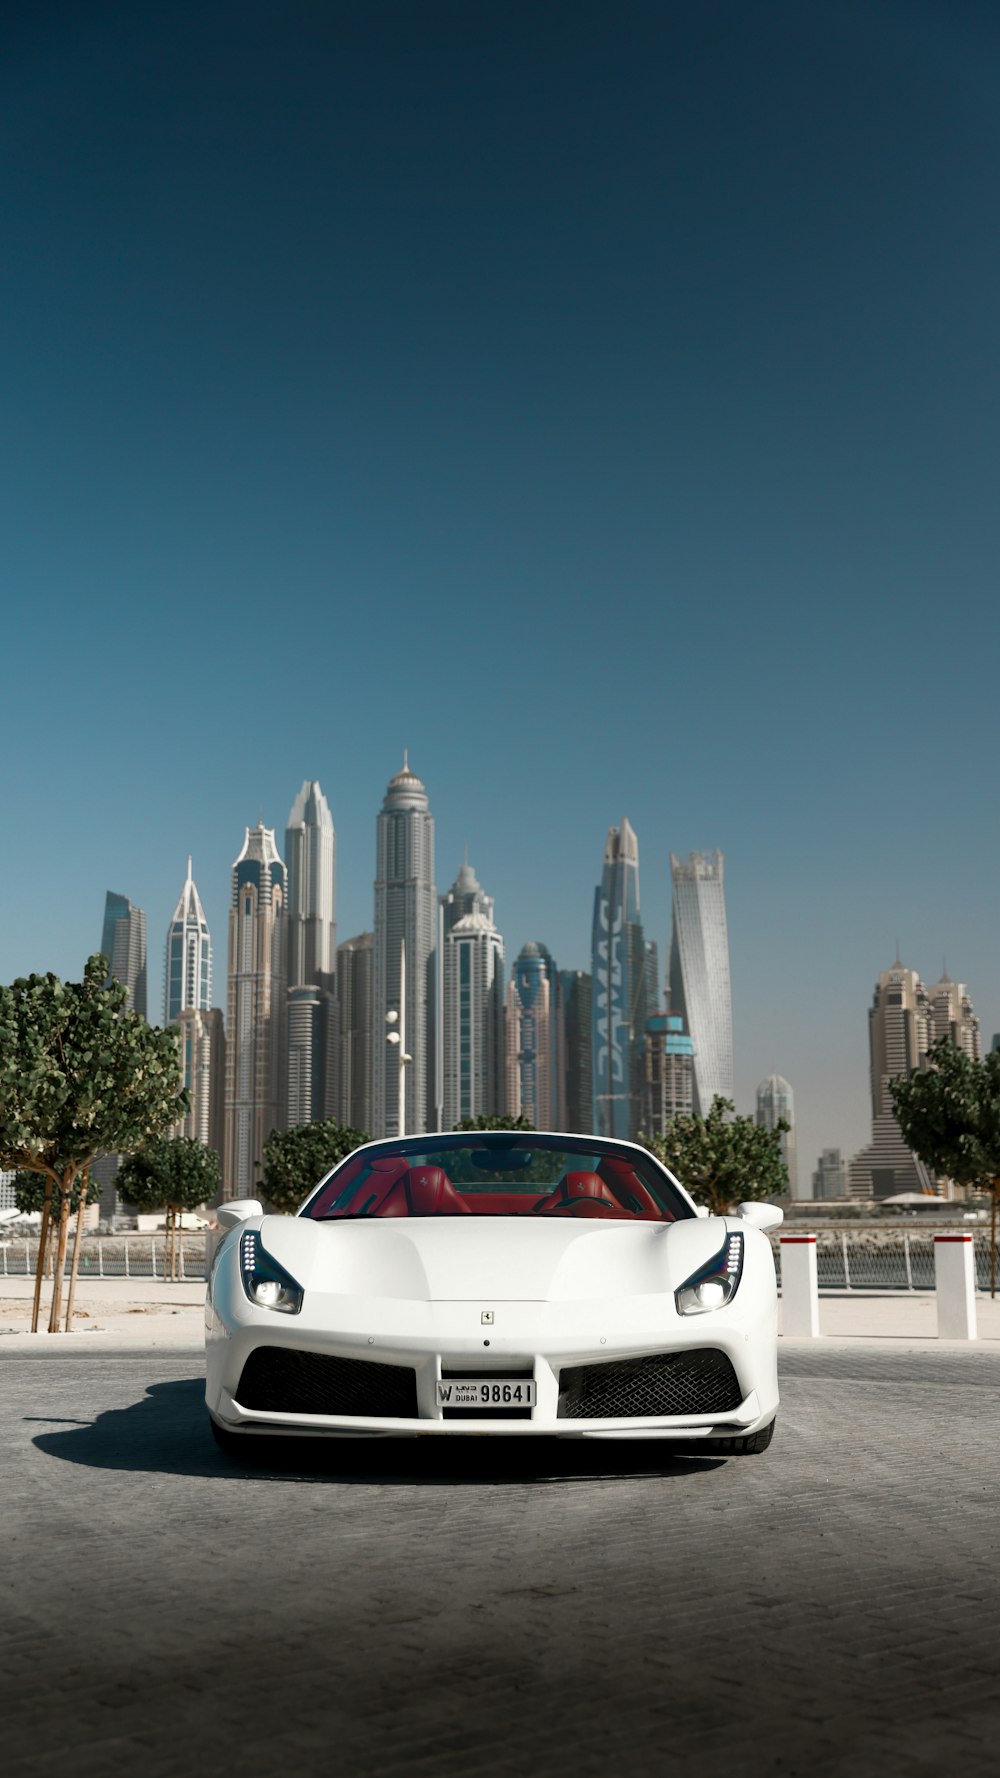 a white sports car parked in front of a city